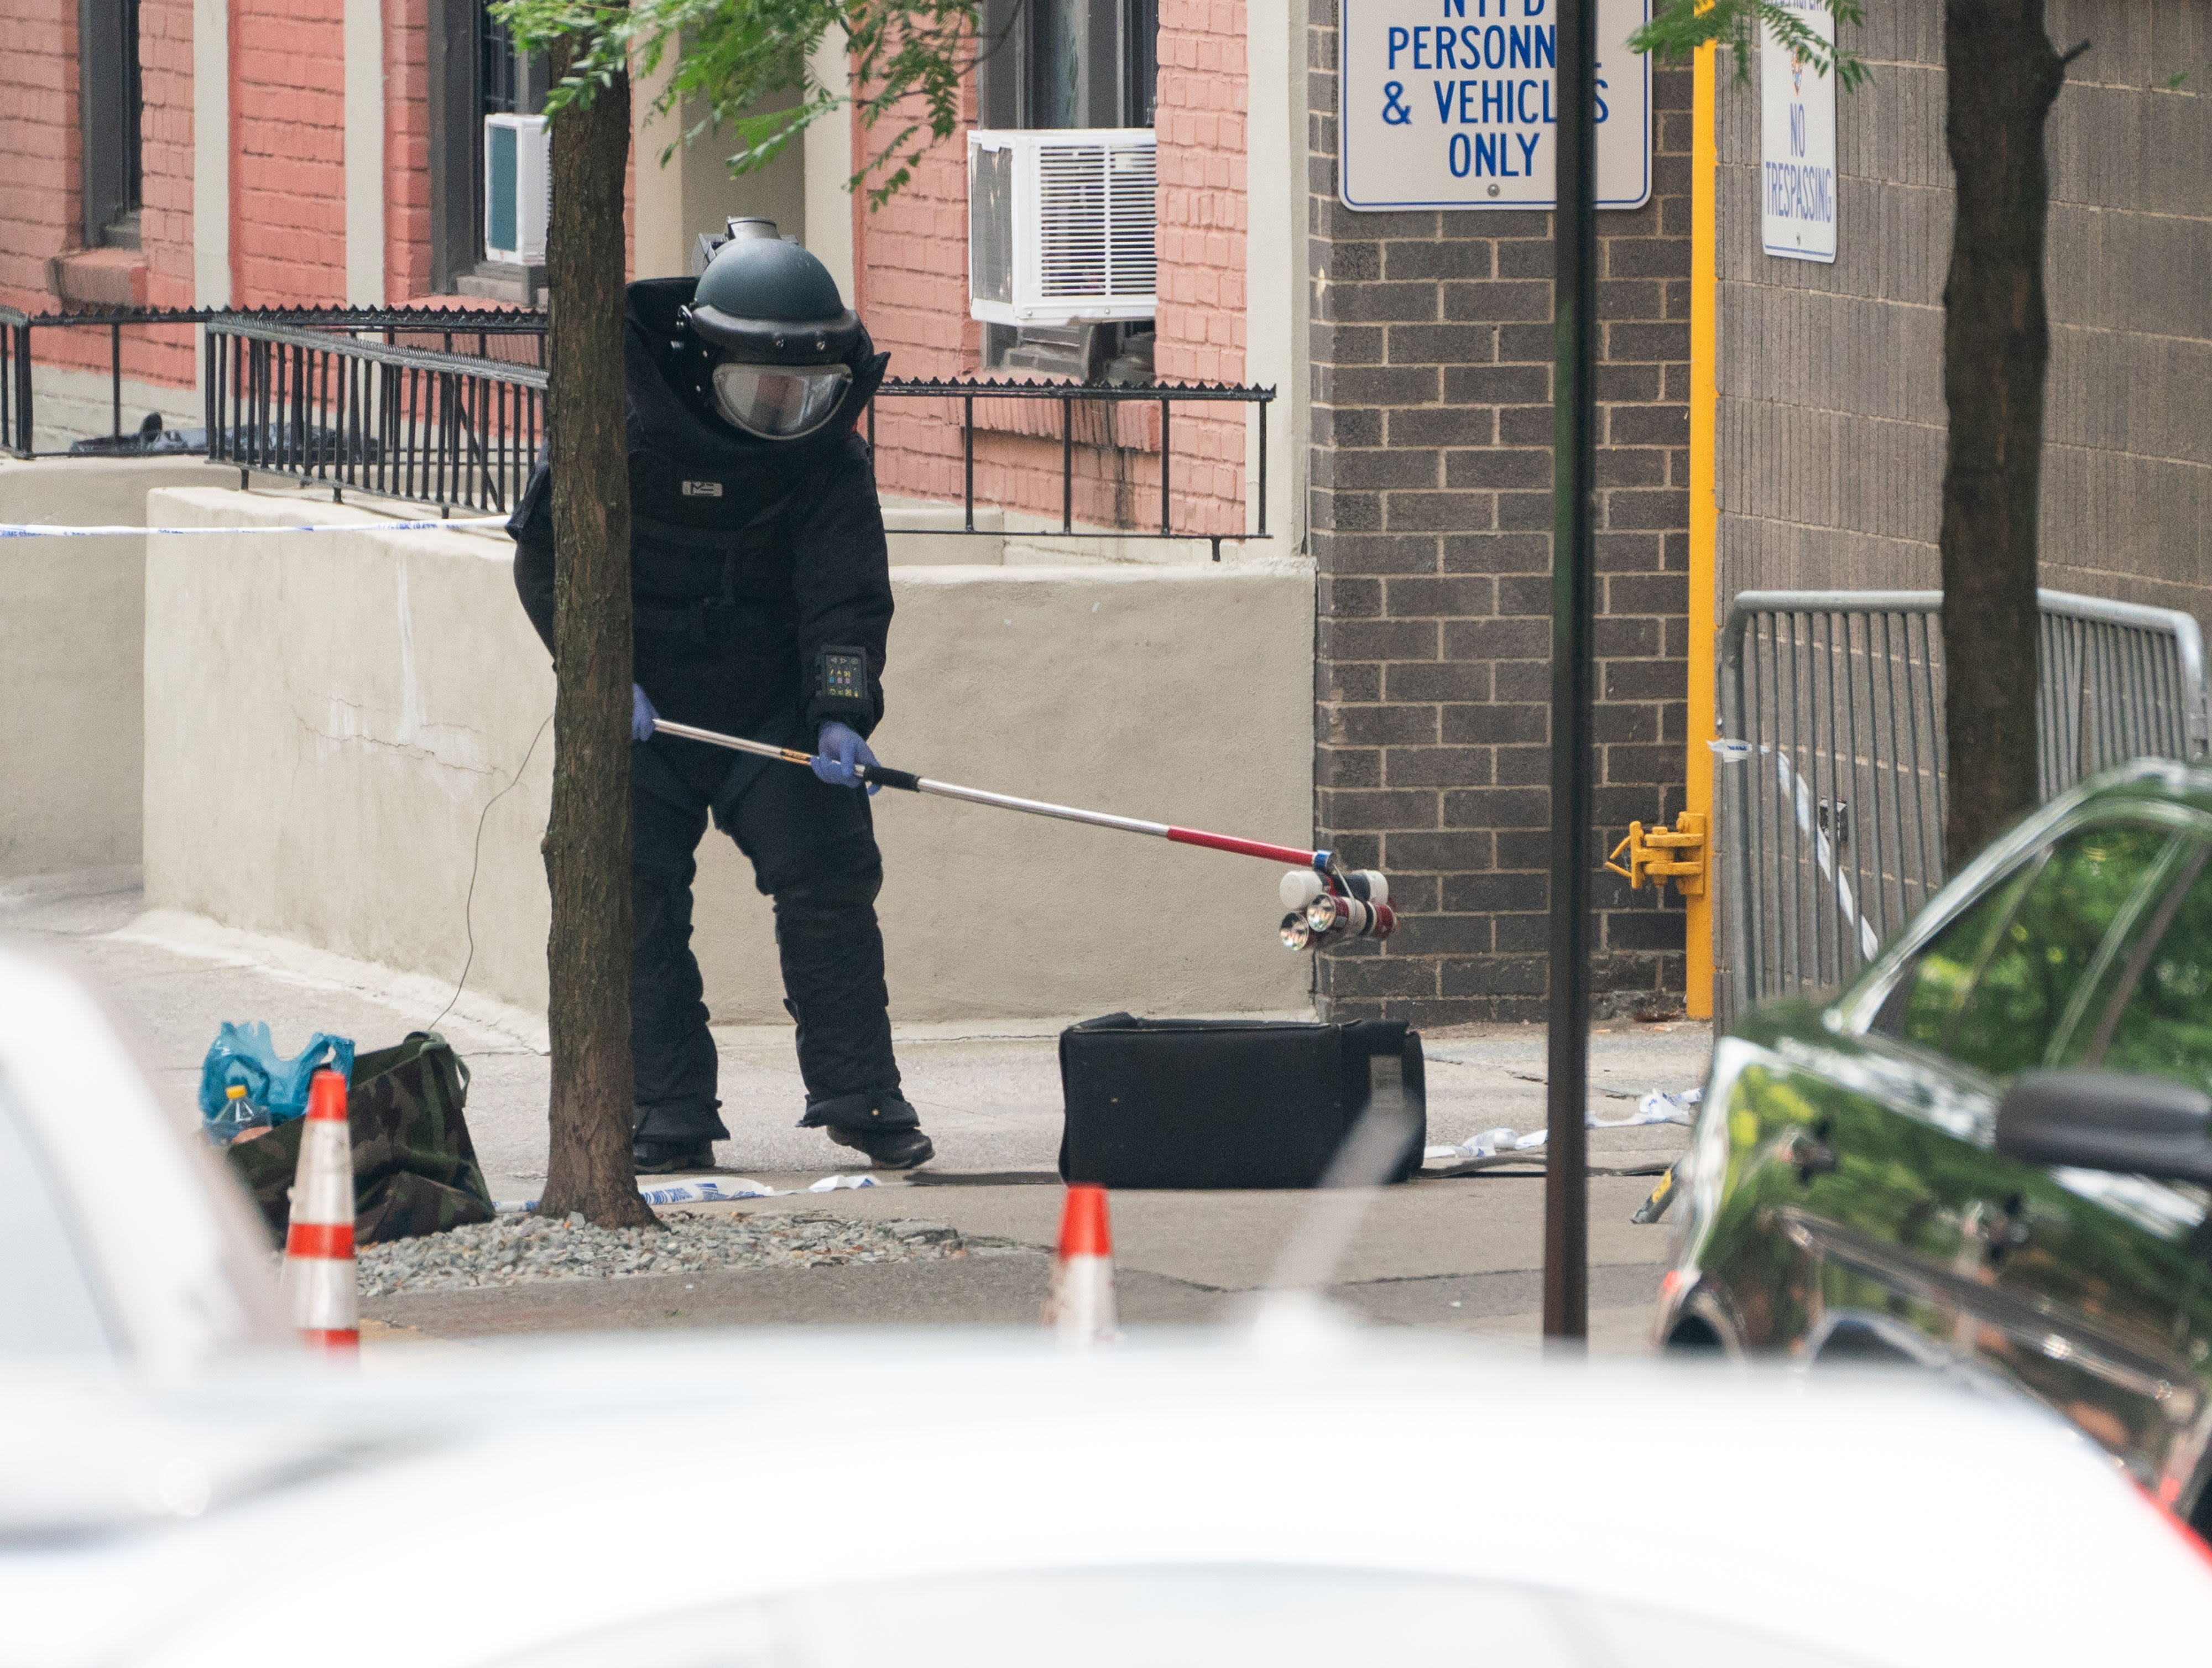 Bomb found outside East Harlem NYPD stationhouse was operable, suspect charged